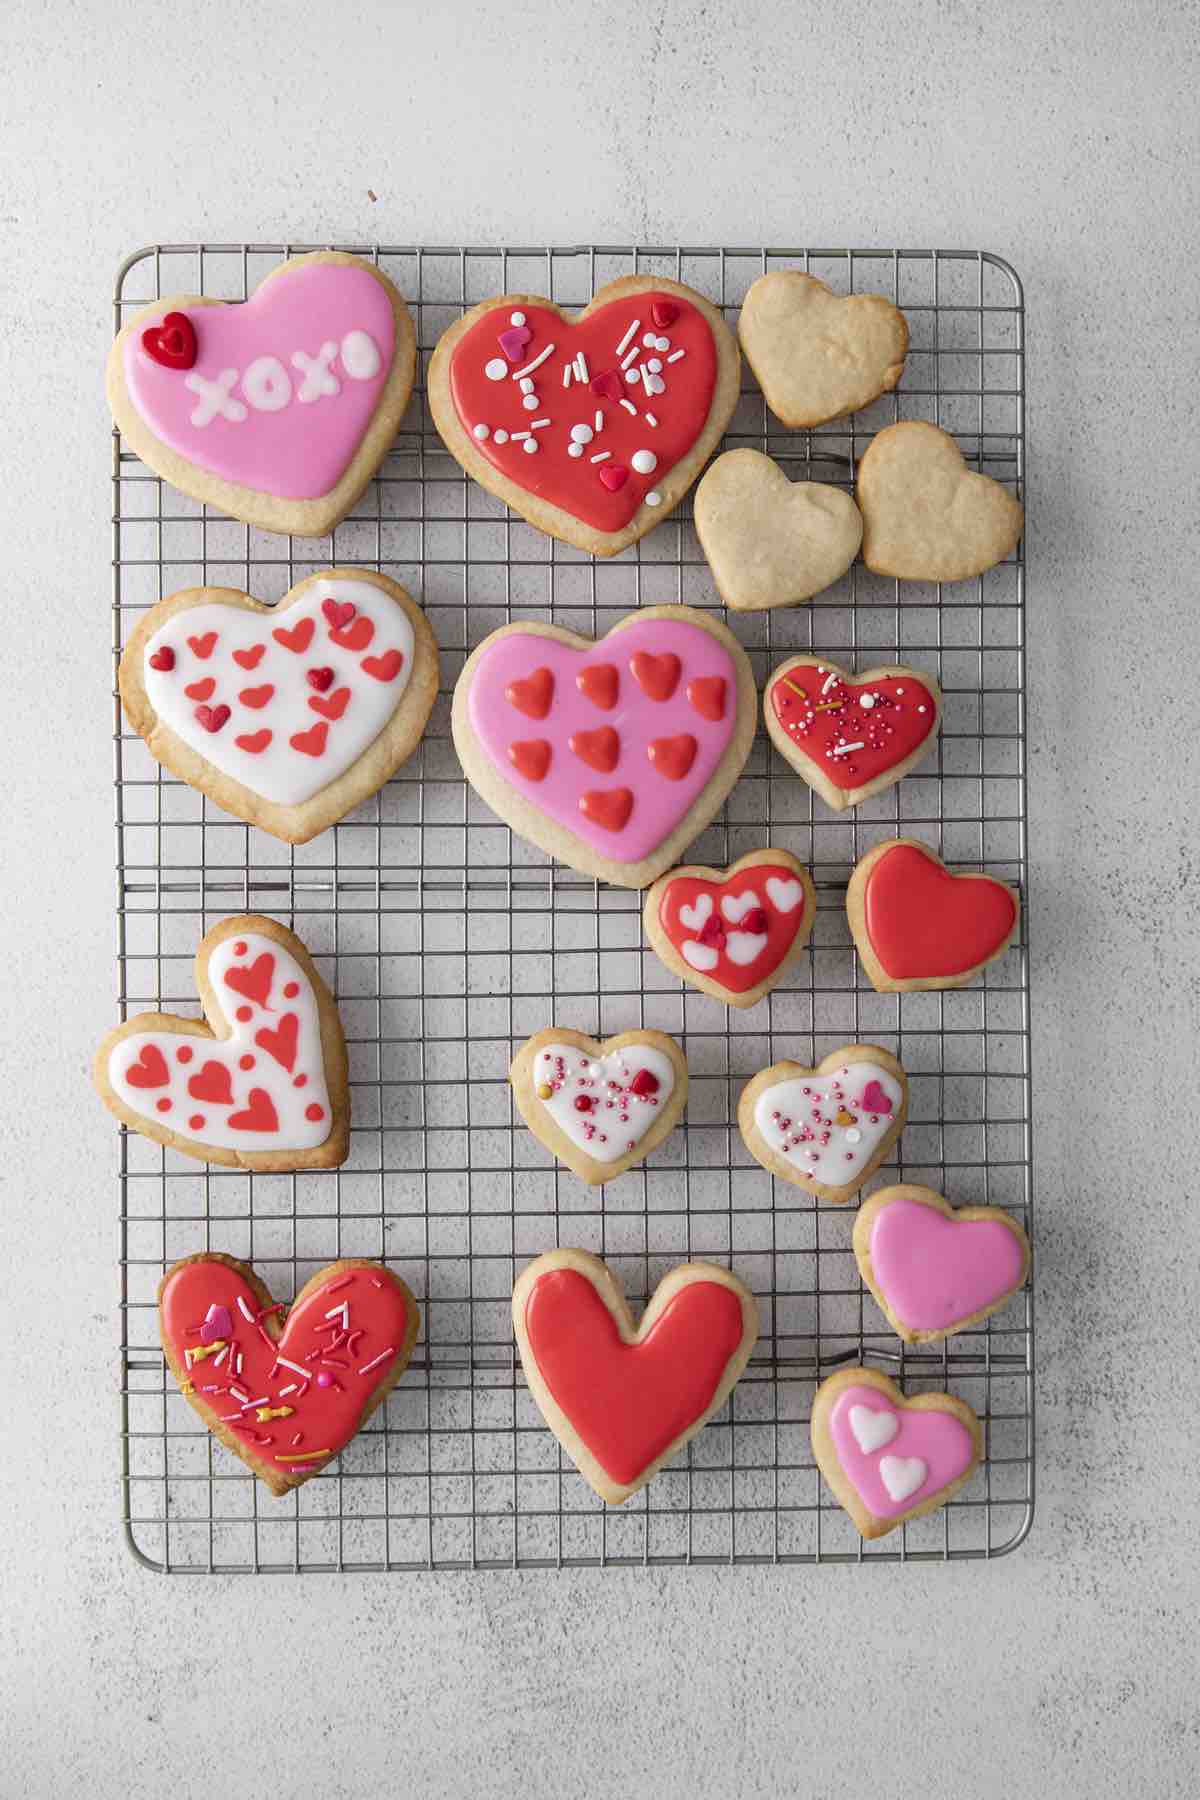 These heart shaped cookies were topped with homemade icing and Valentine's Day sprinkles.